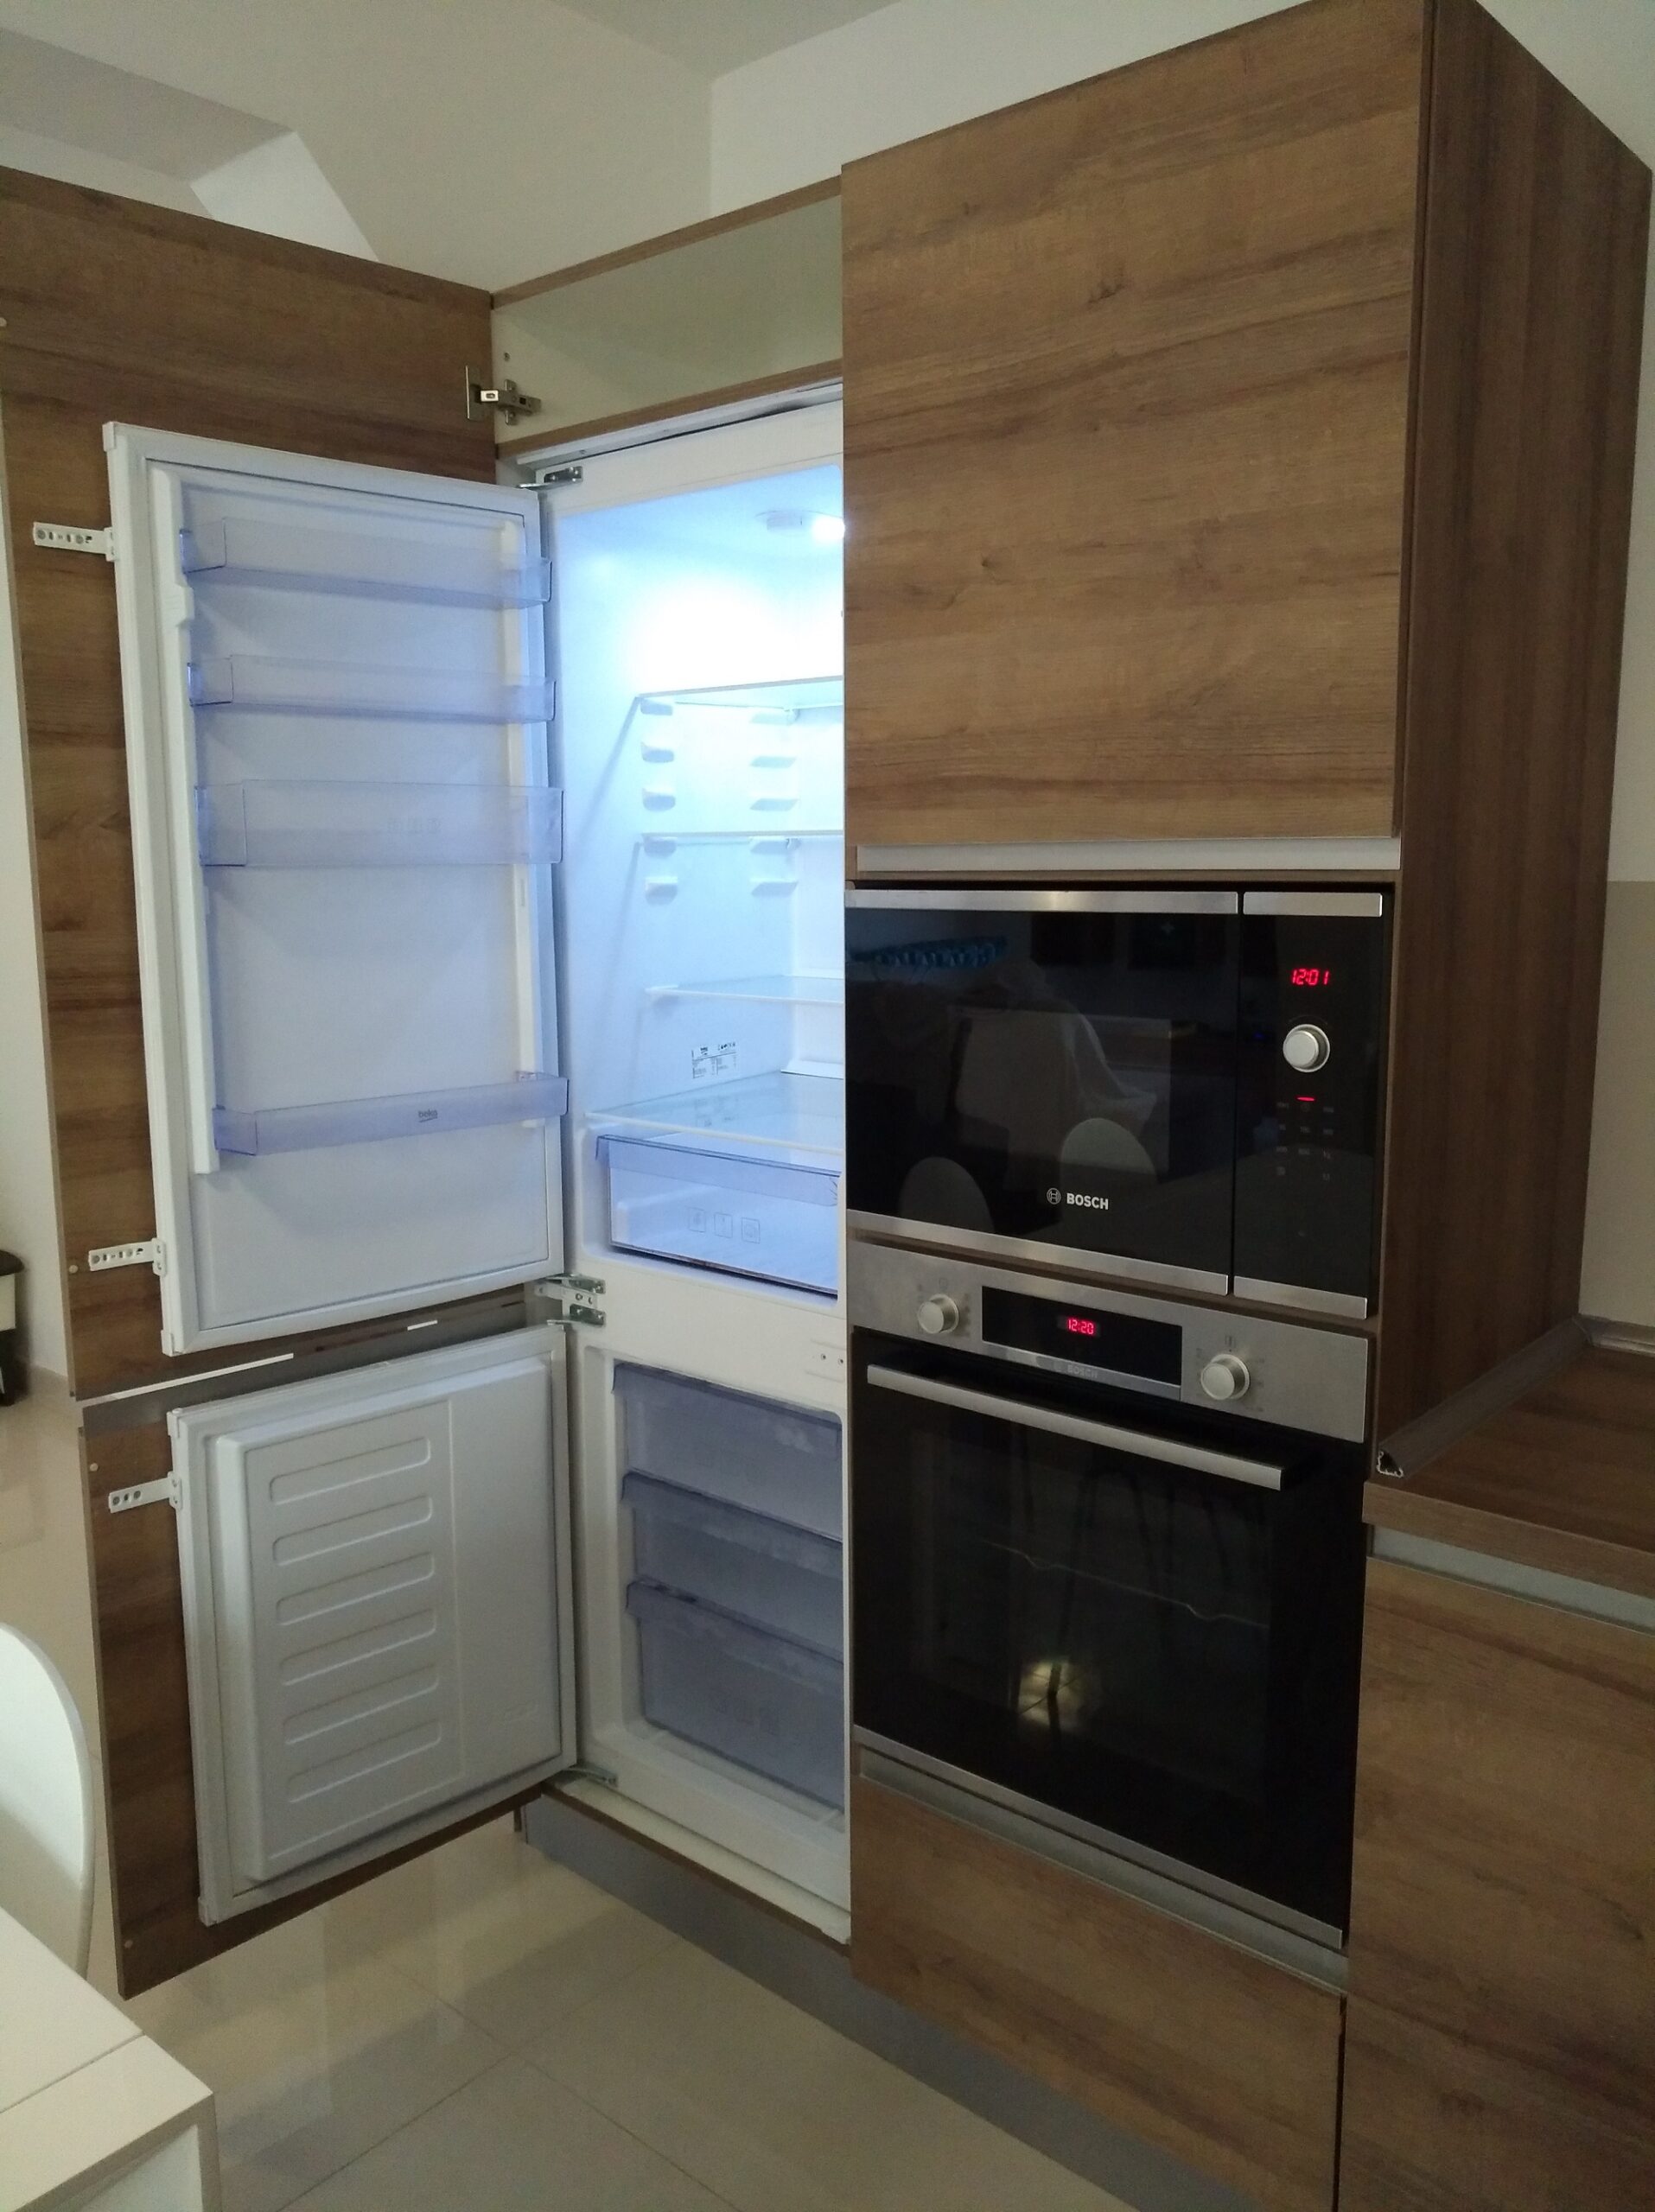 The fridge and oven at our shared student residence in Malta